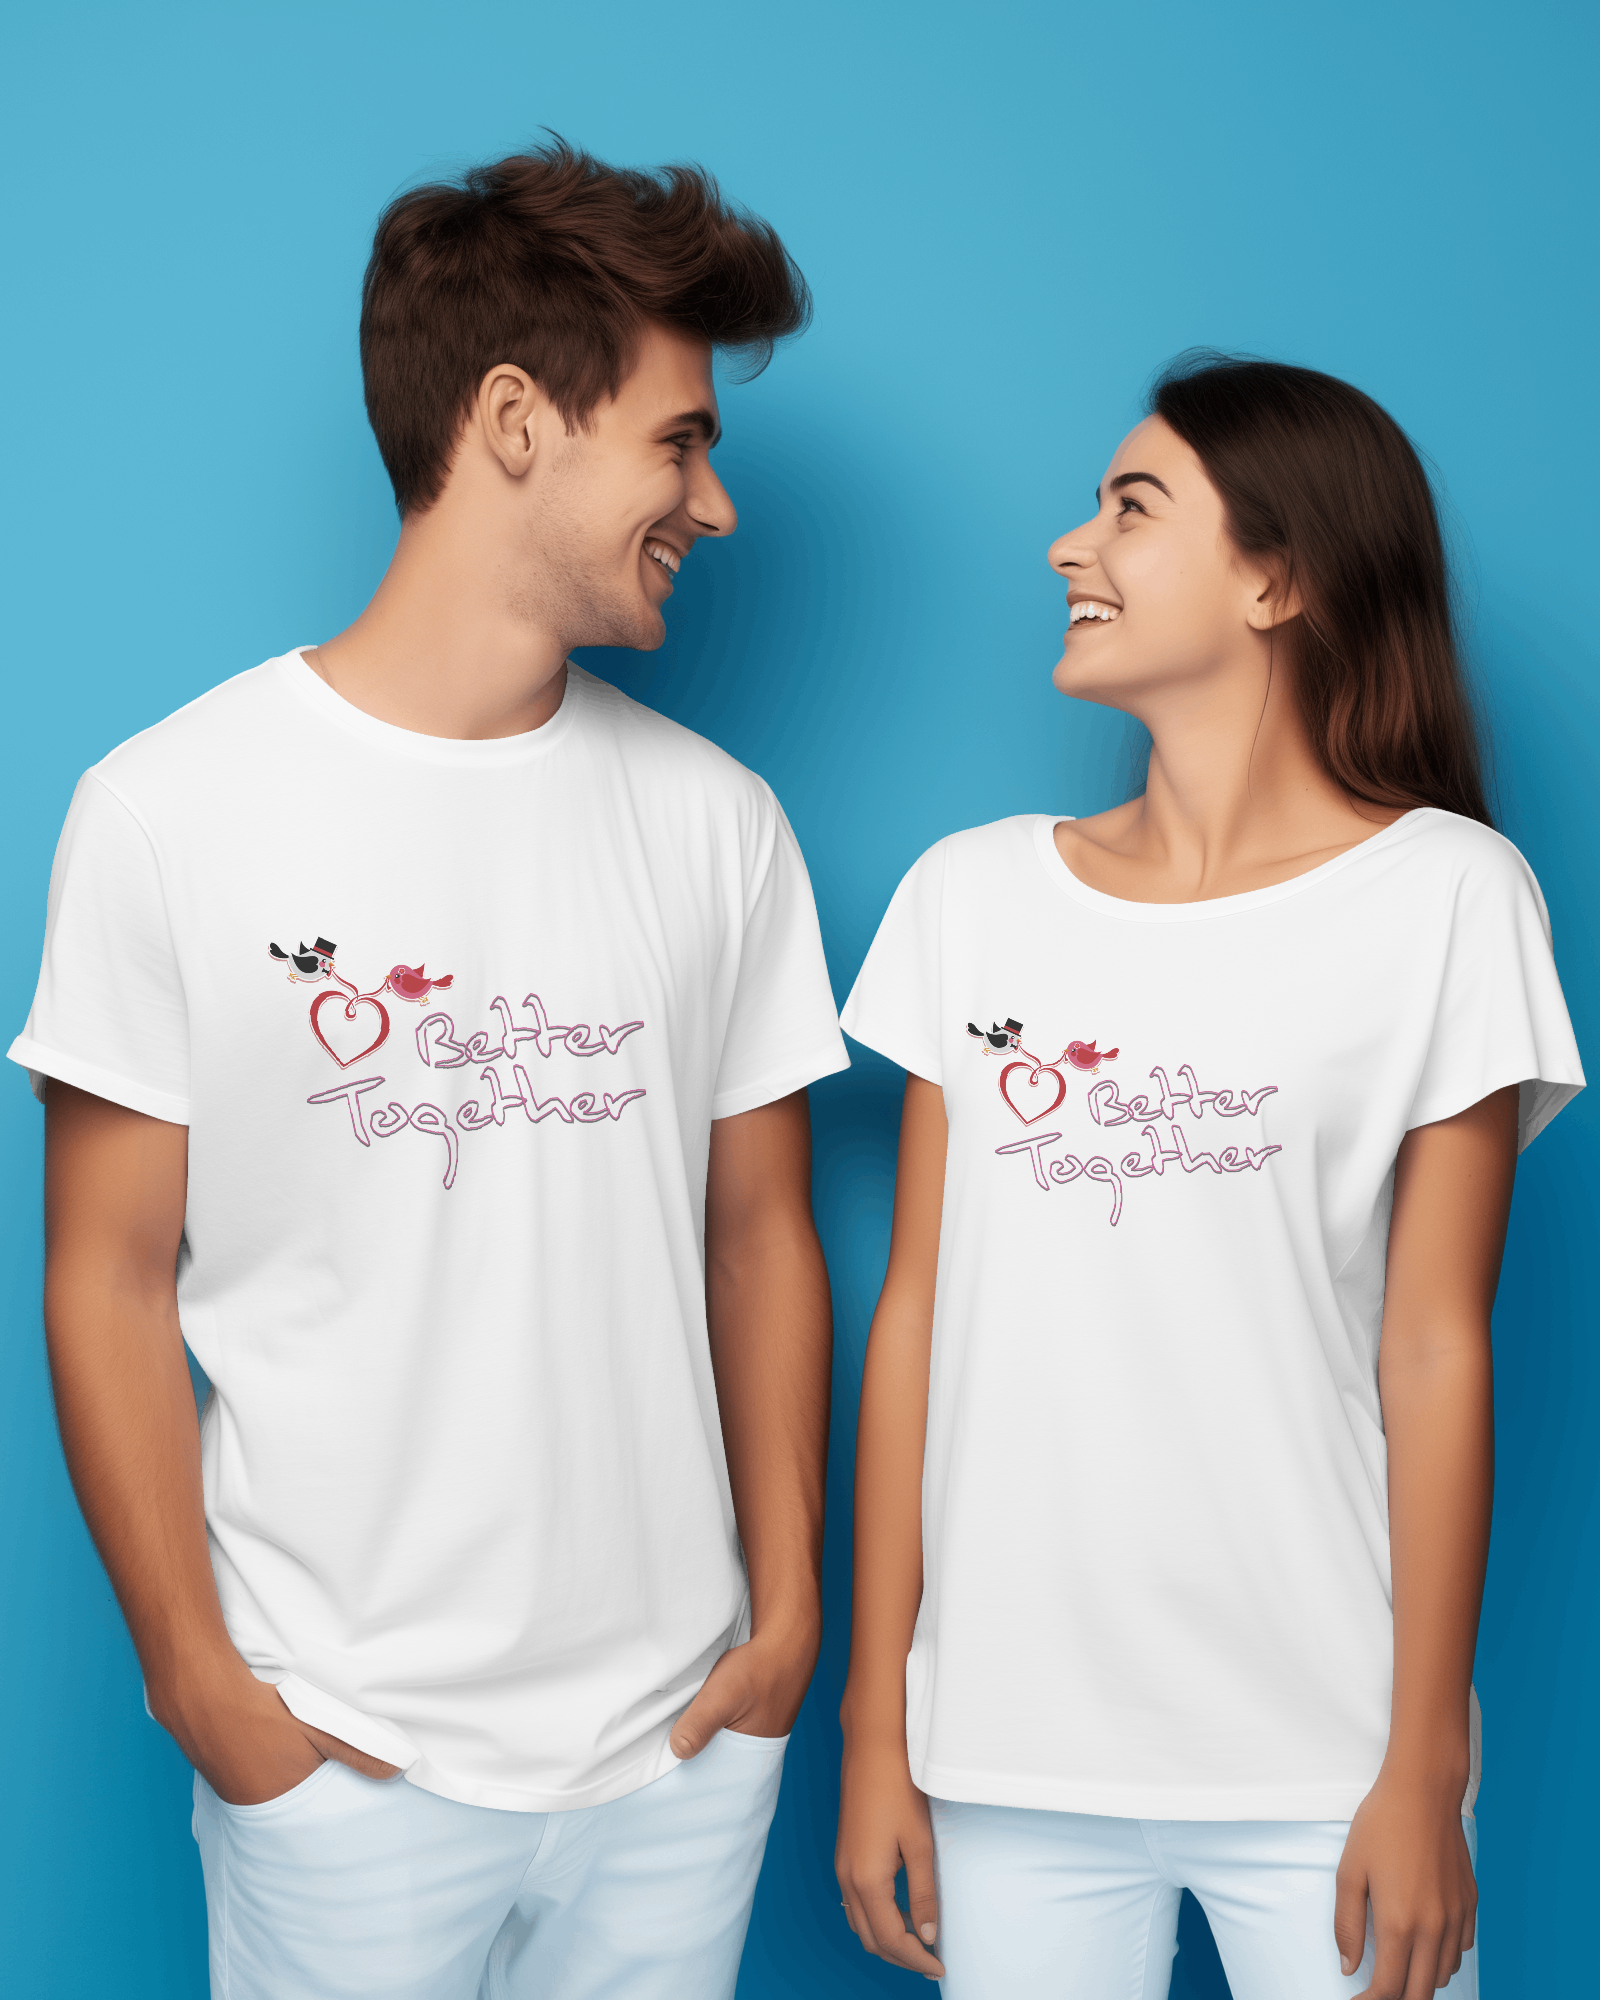 Better Together Tshirt for couple